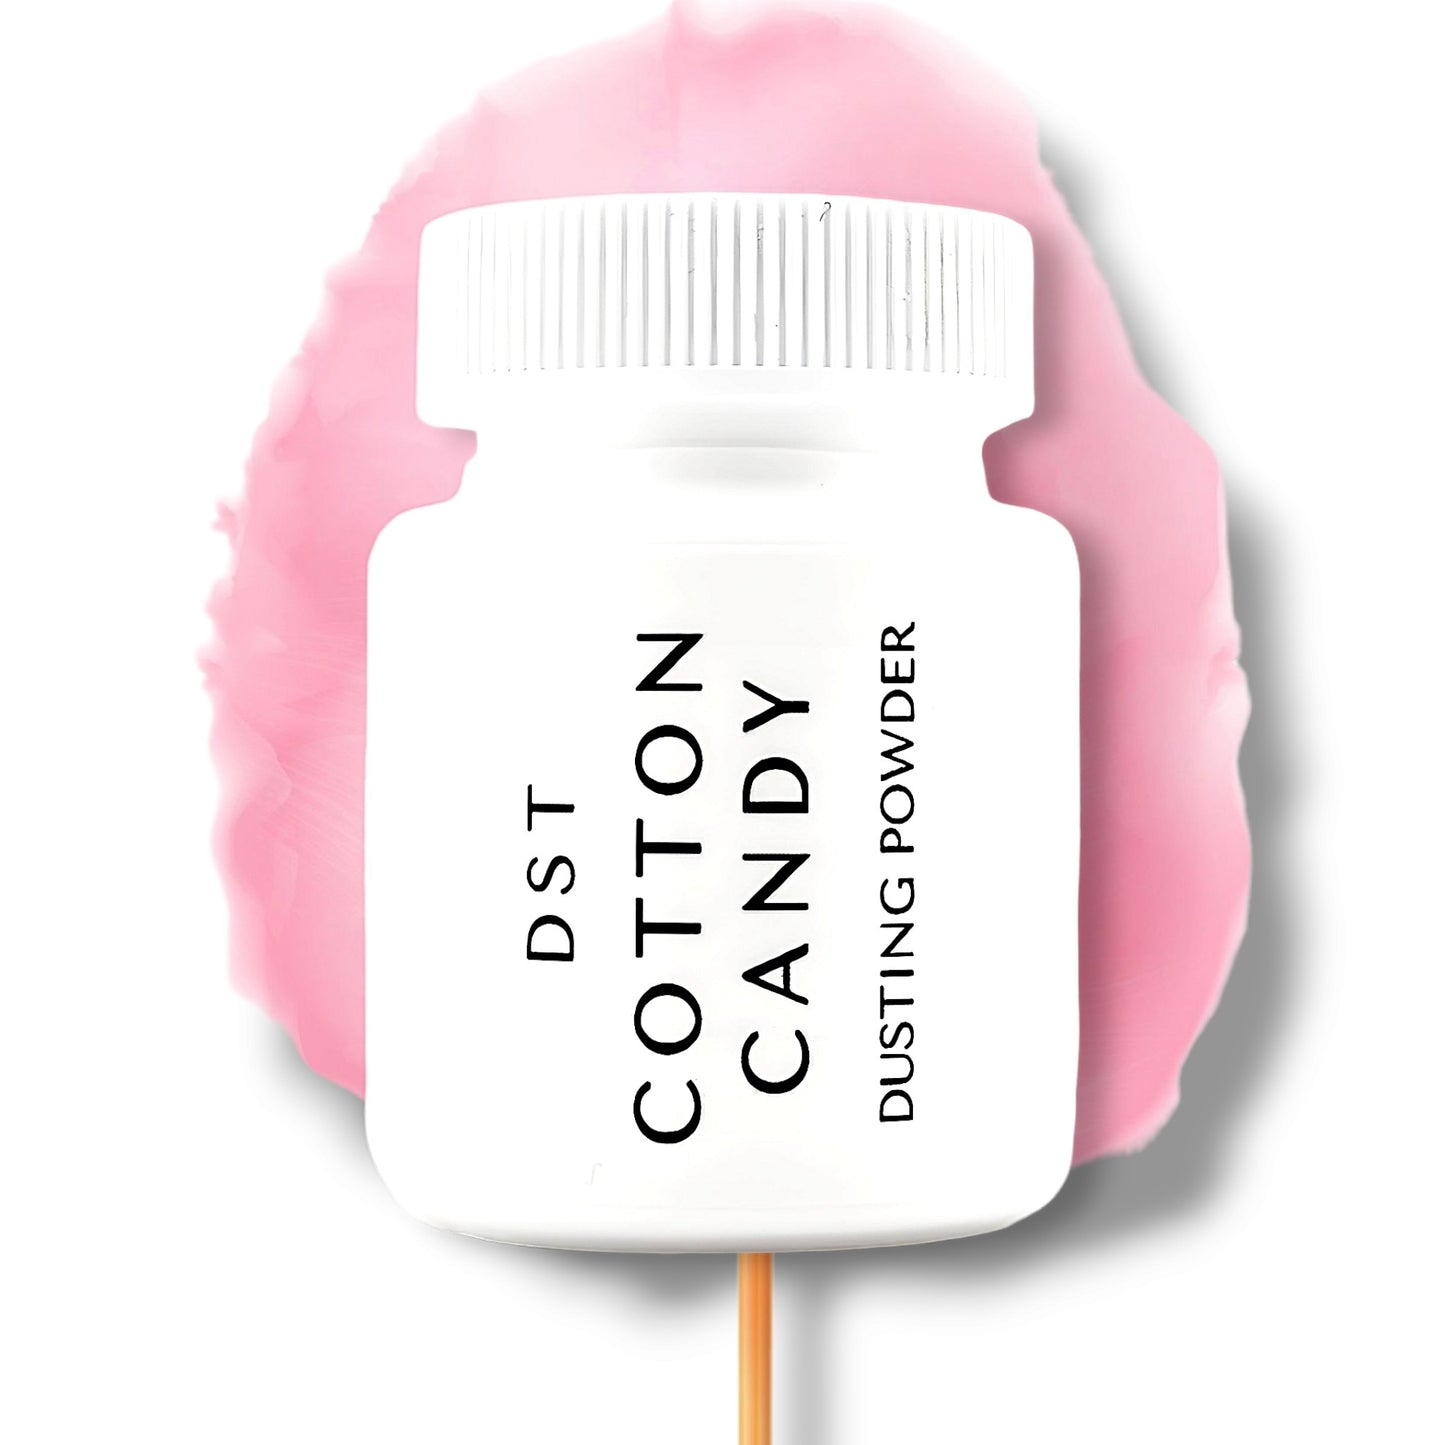 Cotton Candy Dusting Powder